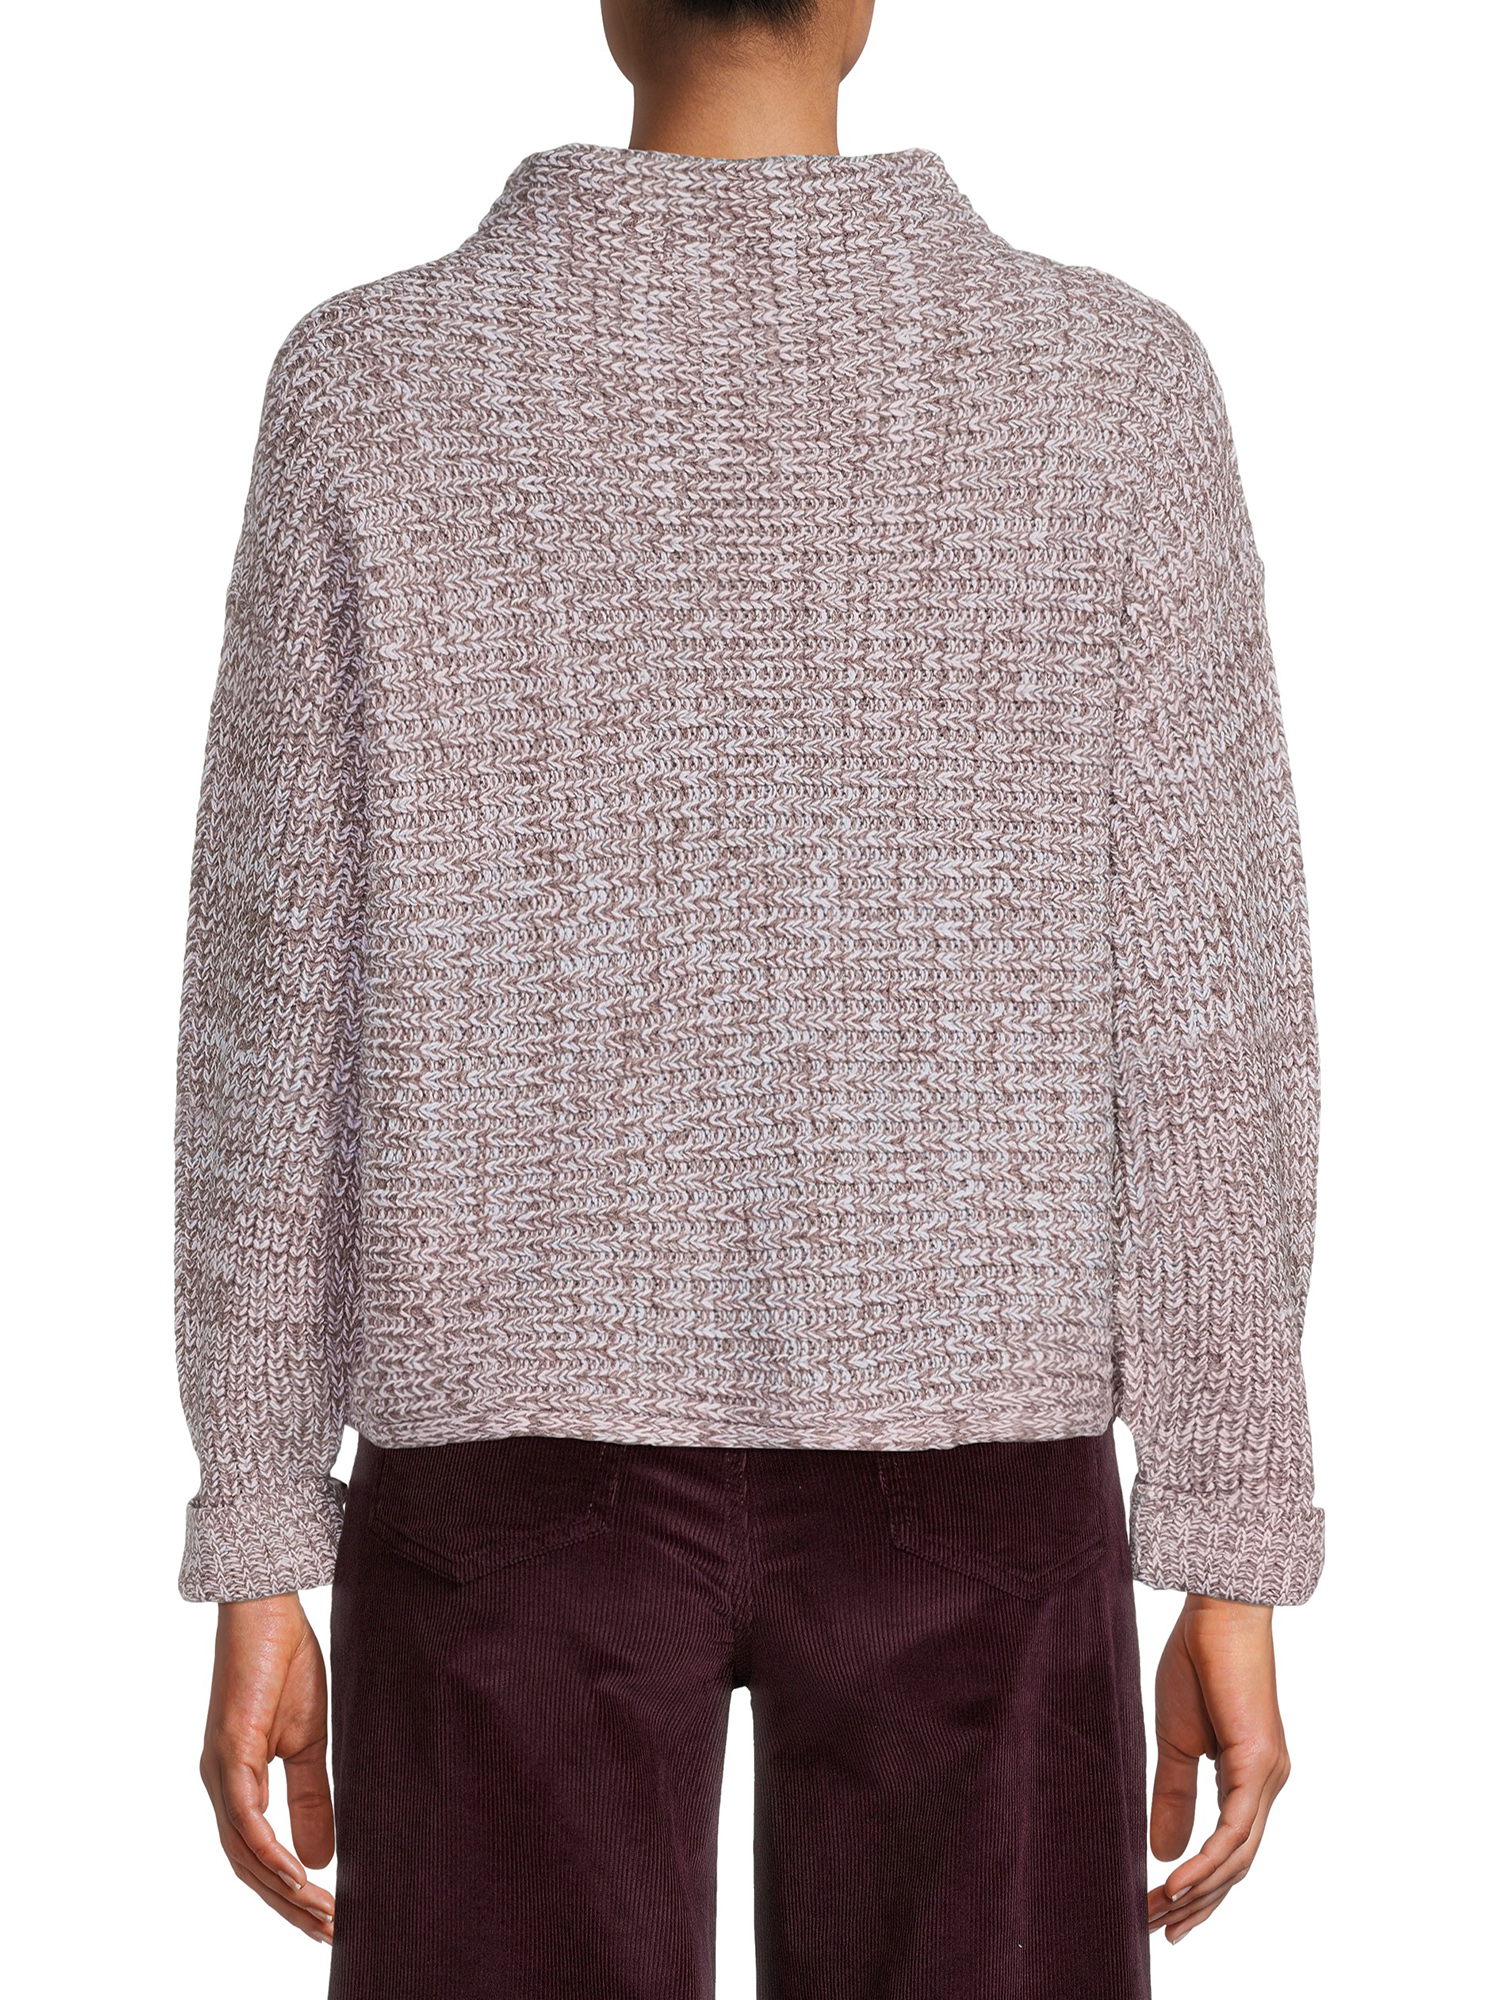 Time and Tru Women's Horizontal Shaker Knit Sweater - image 4 of 5